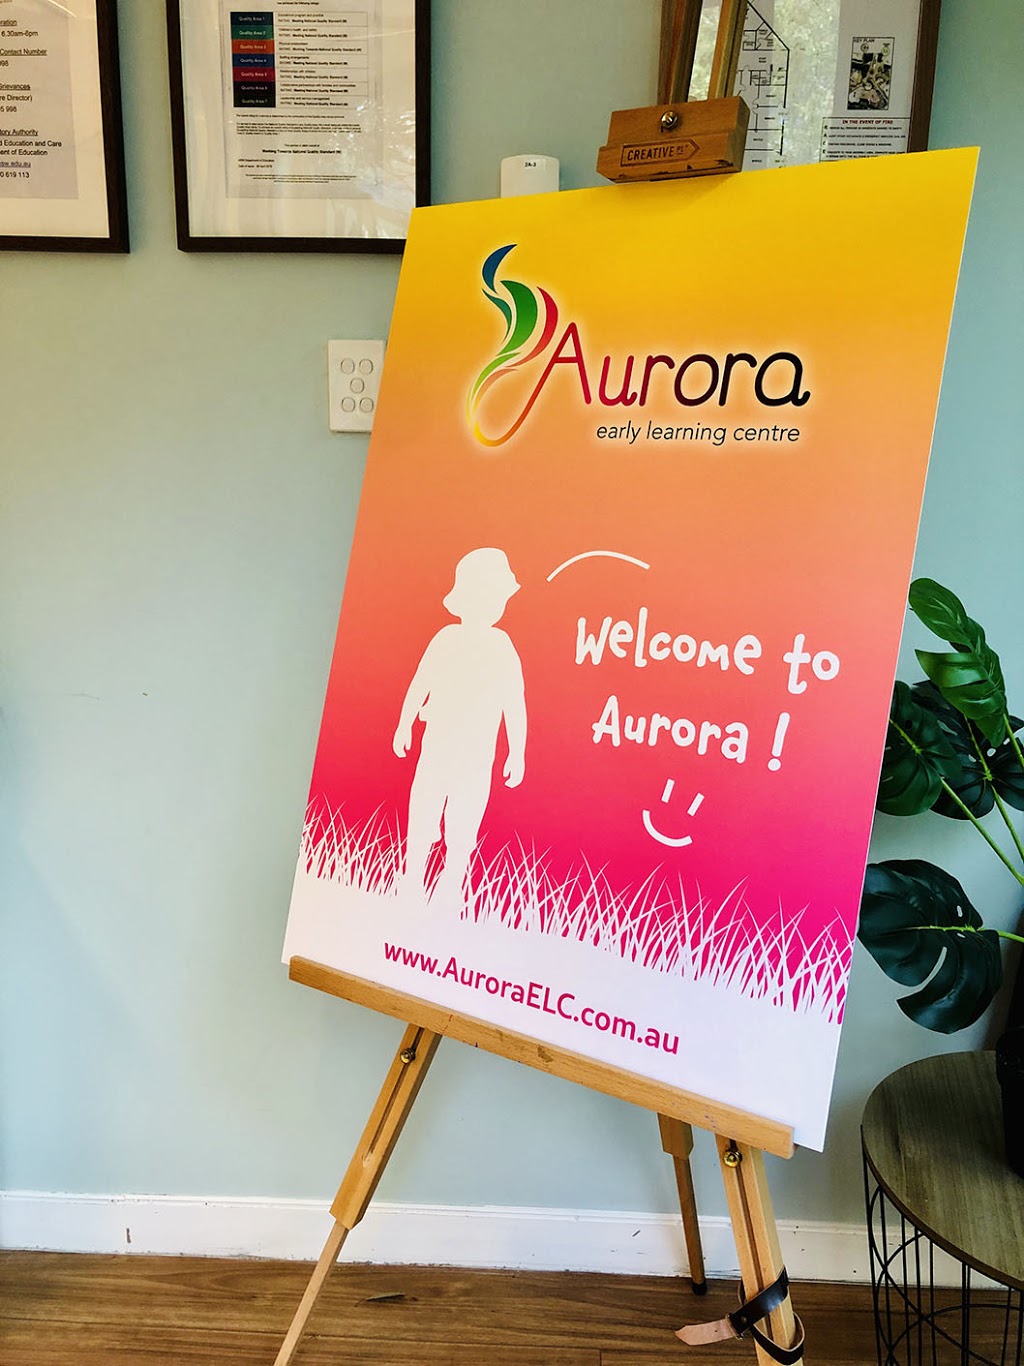 Aurora Early Learning Centre - Frenchs Forest | school | 20 Rodborough Rd, Frenchs Forest NSW 2086, Australia | 0294539375 OR +61 2 9453 9375